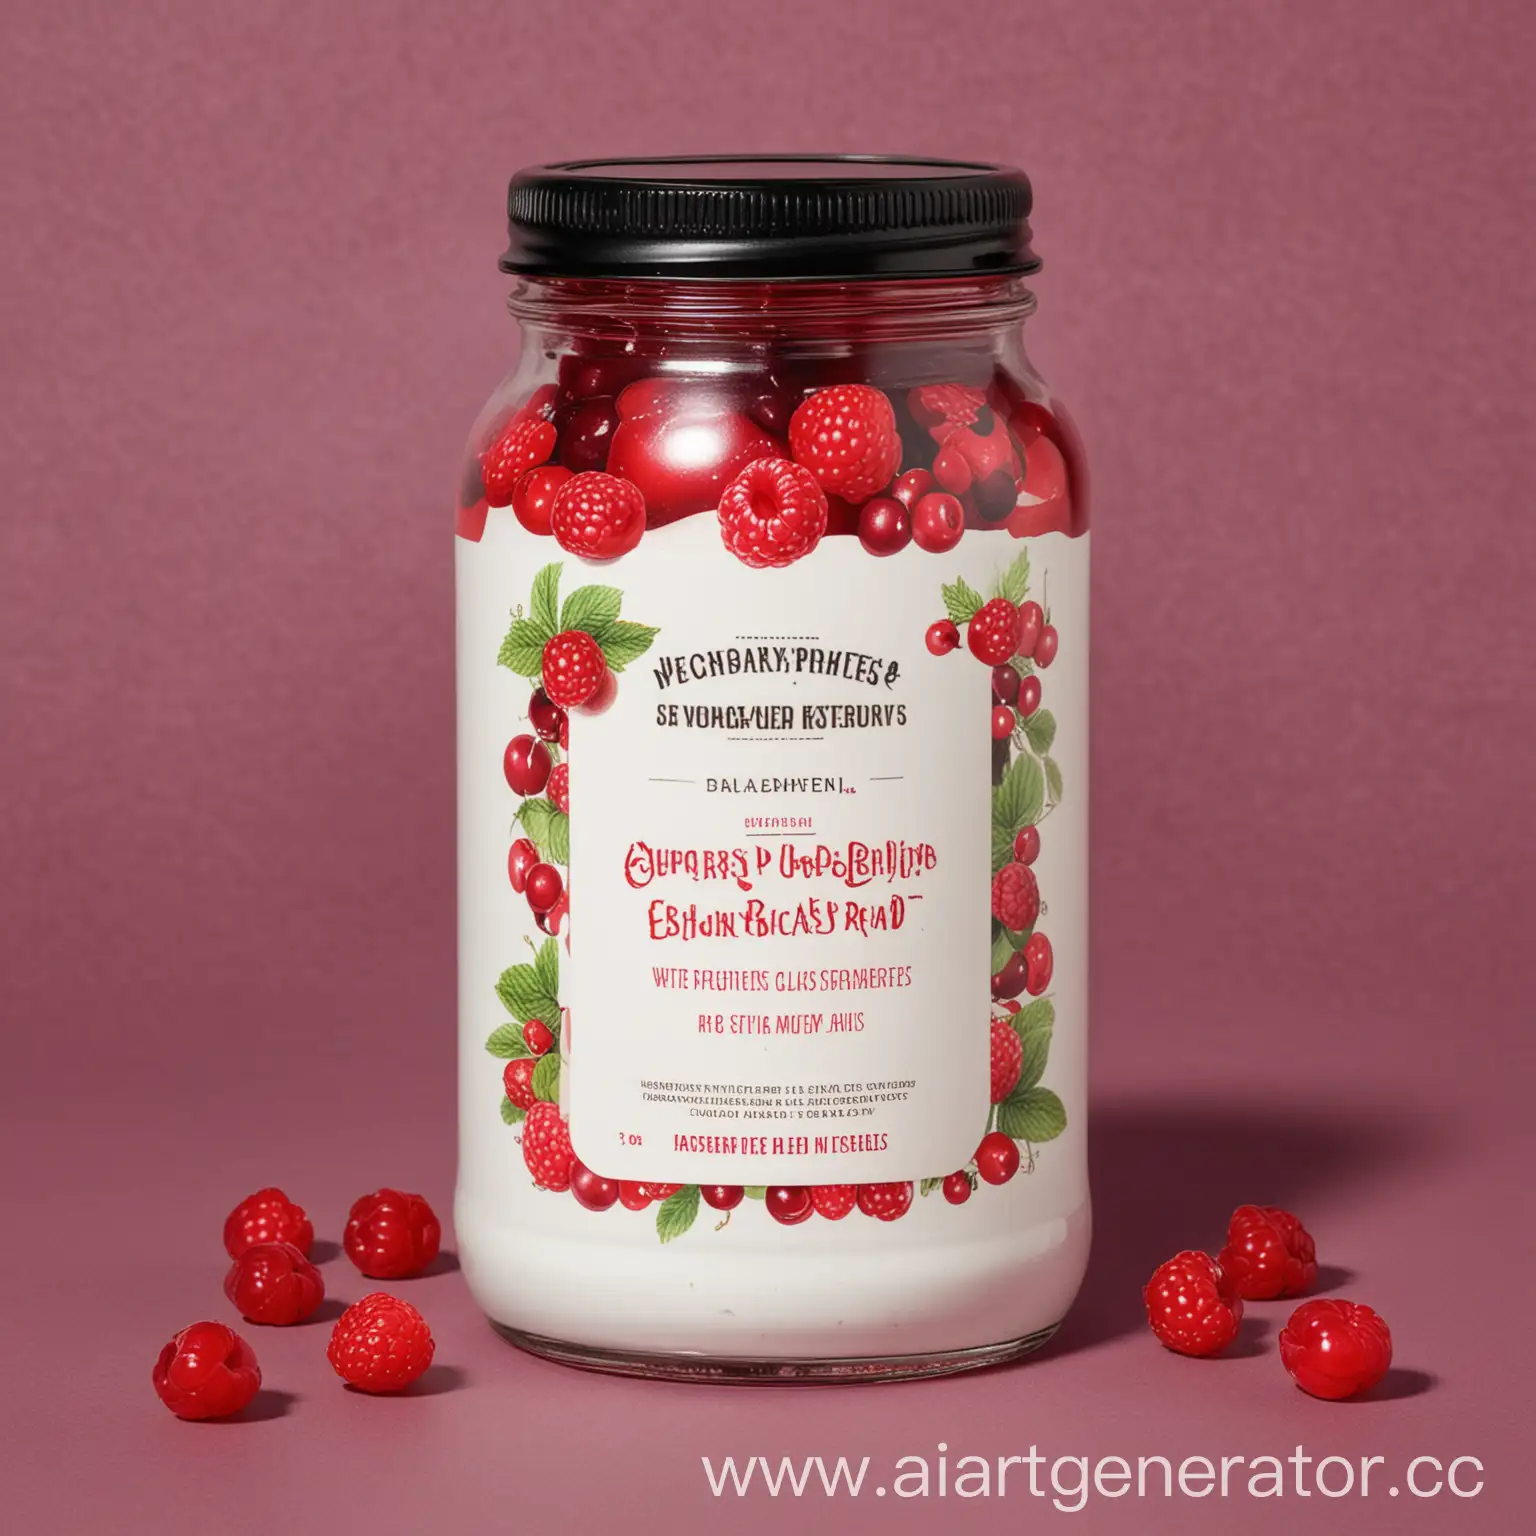 BerryFusion-Blend-Jar-with-Cranberries-Raspberries-and-Red-Currants-Illustration